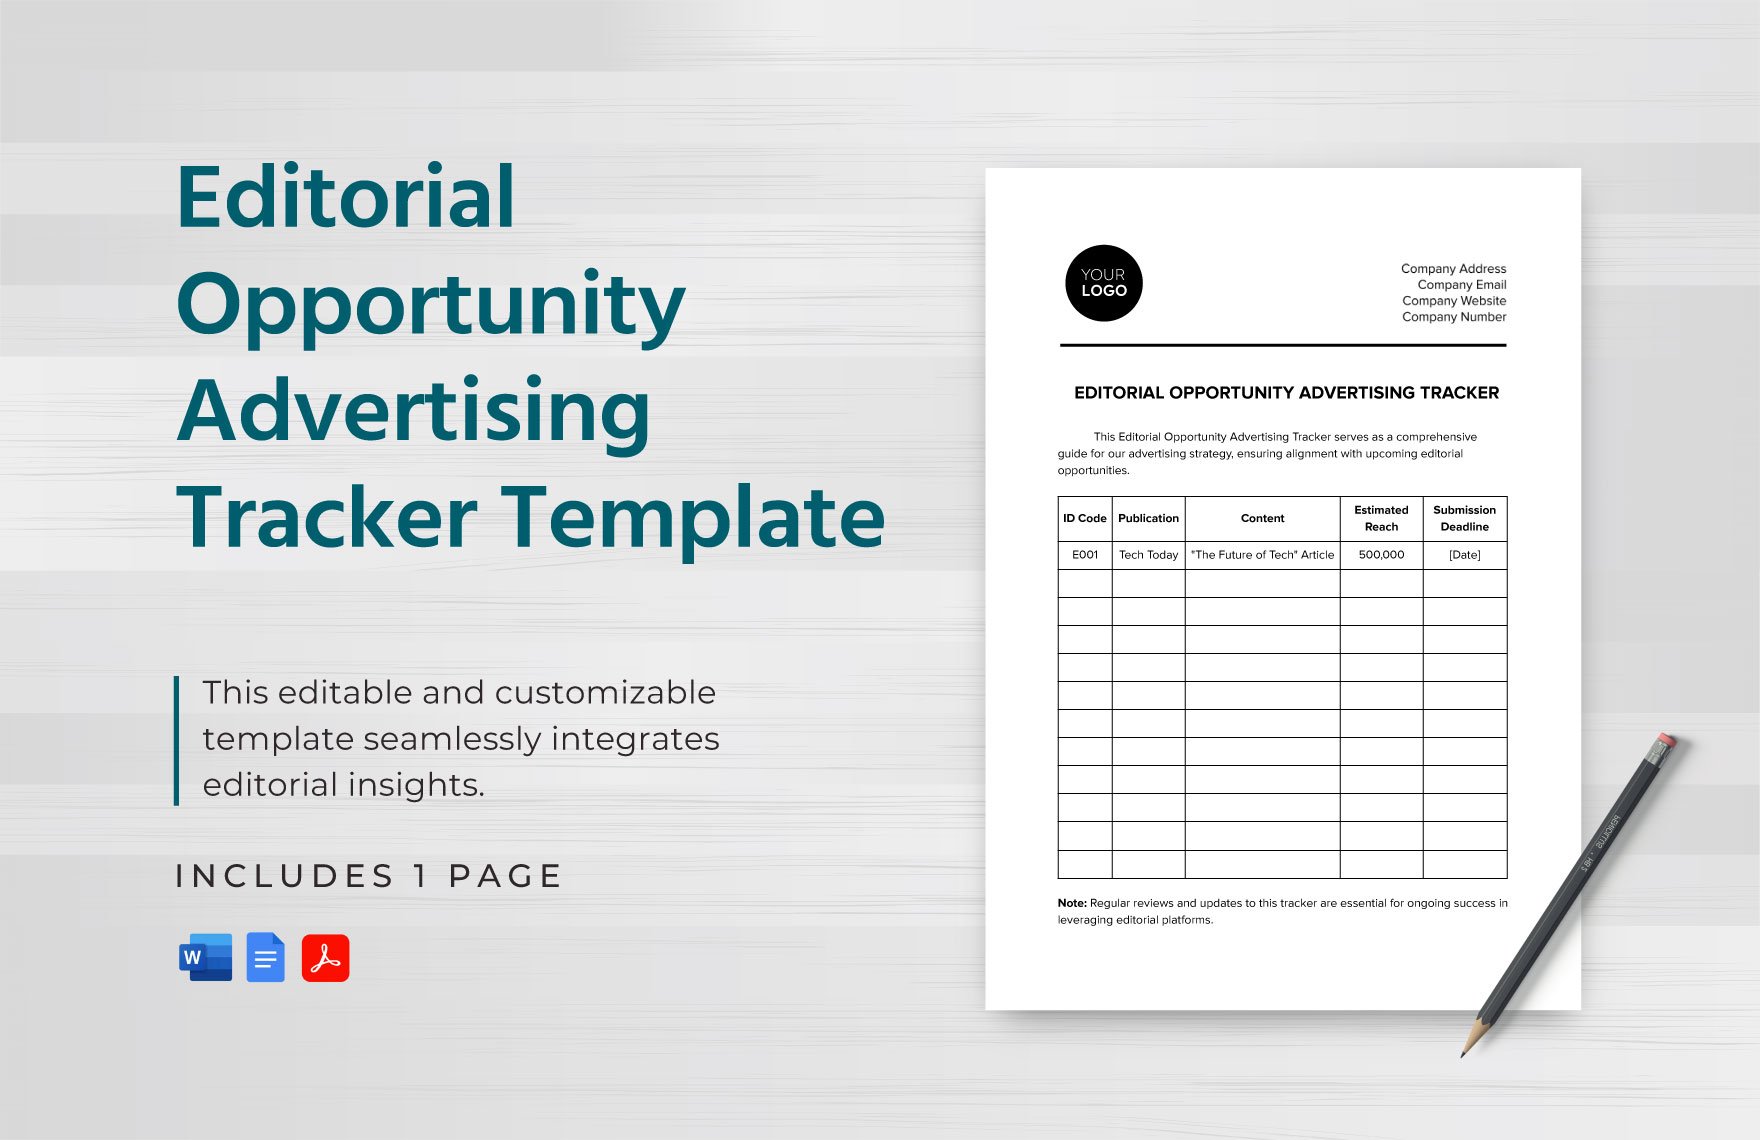 Editorial Opportunity Advertising Tracker Template